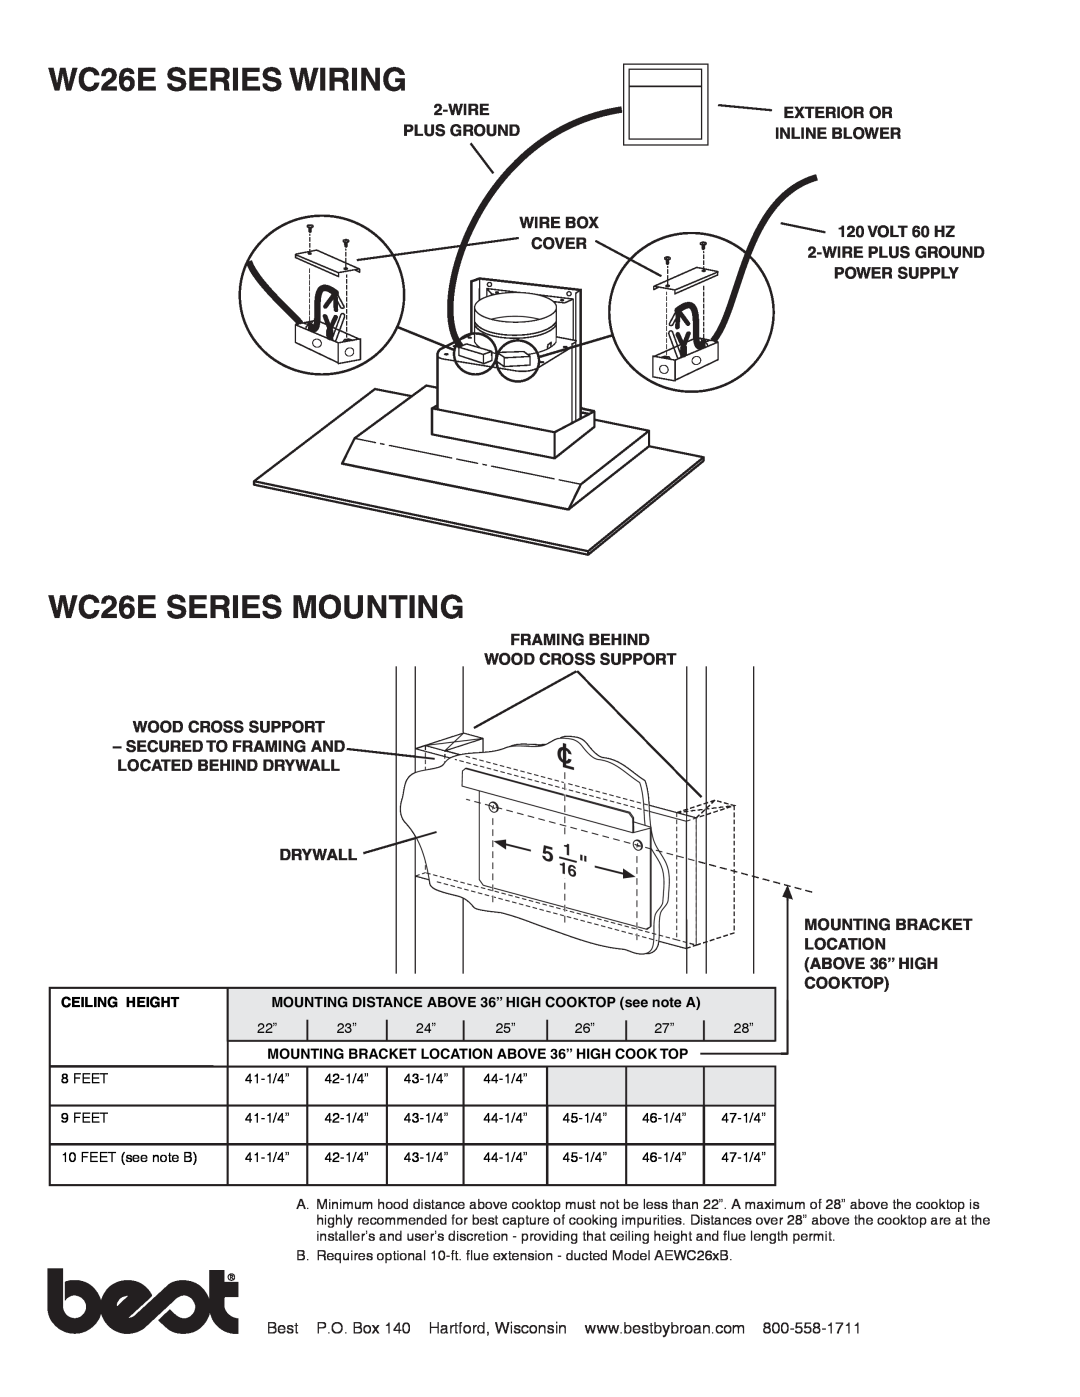 Best WC26E Series WC26E SERIES WIRING, WC26E SERIES MOUNTING, Ceiling Height, Mounting Bracket Location Above, 36” high 